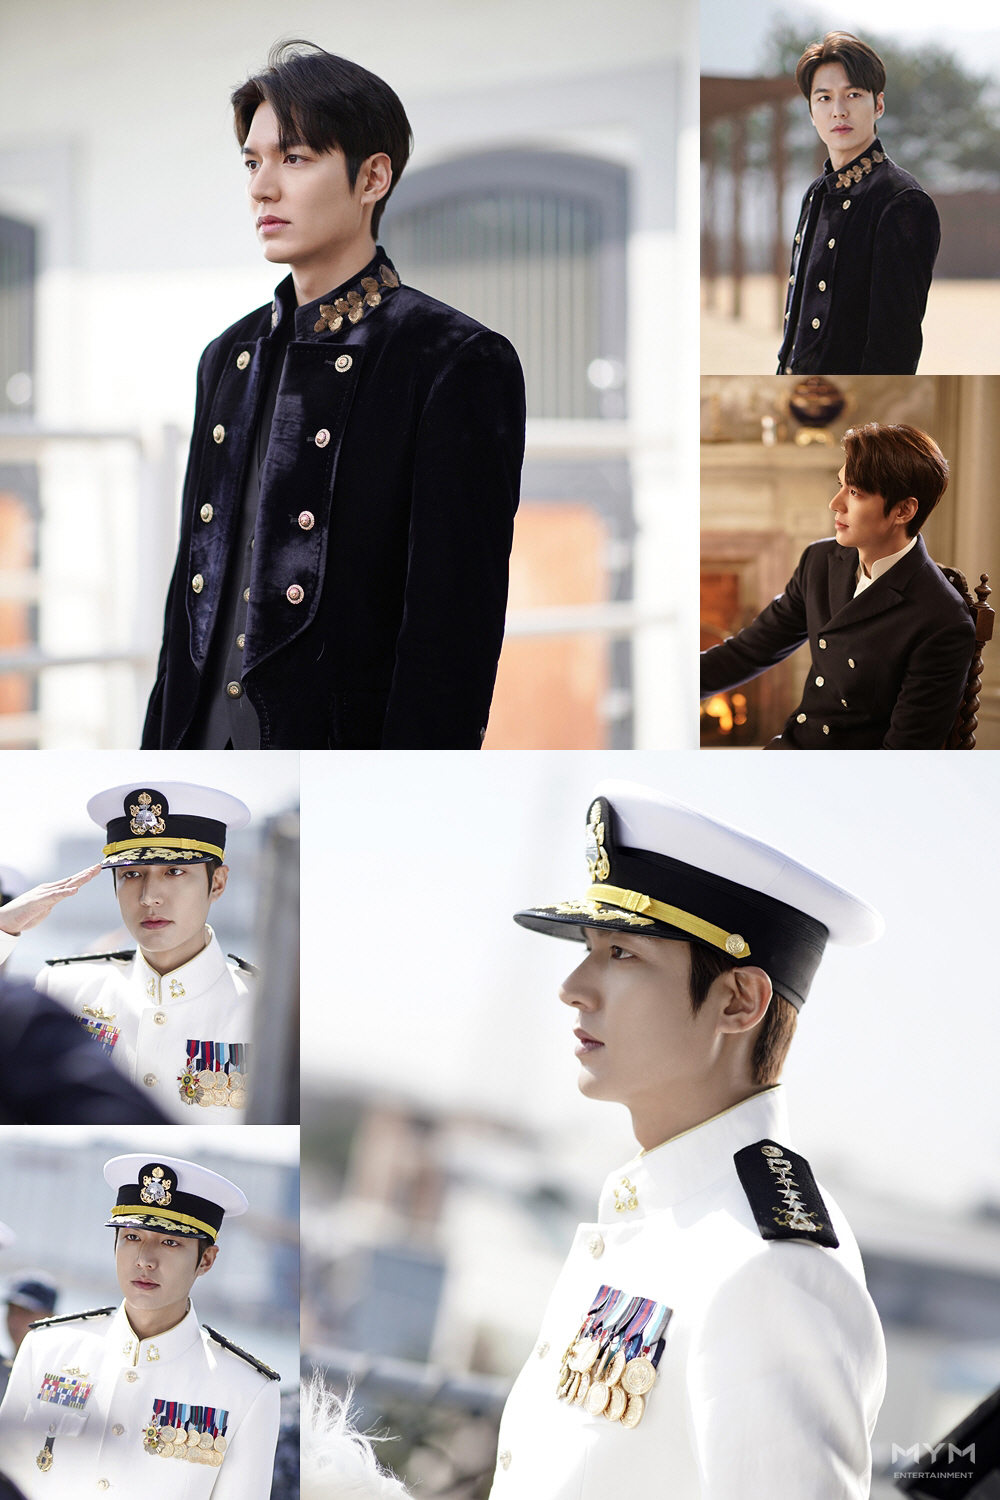 4 SBS Financial Review drama The King : eternal monarch(the king)from Korea Yellow Emperor the dragon into the station rolled the Lee Min-hos uniform, the cut was unveiled.Drama first appeared from the gaze to the overwhelming Black colors of the Yellow Emperor uniforms and riding dress form, the White Royal Navy uniform Lee Min-ho of all eyes. What the outfit classy, the Yellow Emperors dignity, to live and Lee Min-ho of superiority for visual inspiration there.Especially Royal Navy uniform steel over the last 5 to November 2 broadcast of the king 6 meeting scene, with the Royal Navy for you Yellow Emperor The Dragon for the Empire of the English to invade Japan in direct response to me in that moment was. Imperial is the most honorable moment in military uniformis a drama about a promise like this, tired of the stringent responsibility which symbolizes a special meaning scene.Lee Min-ho is chiseled for a truck and a strong shoulder, a distinct visage as the perfect uniform fit to show him. A deep sense of mission and pride, revealing the Living Water-View Case Photos in the commander-in-chief who is for the Empire, The Yellow Emperor is up to, including the representation of Lee Min-hos man of strength and charisma is remarkable.Ahead of Lee Min-hos Royal Navy uniform presenceis broadcast from the netizens in hot followers provoked the bar. Riding suit with the Yellow Emperor uniforms in Royal Navy uniforms until Lee Min-ho of the men in the other uniforms digestion for this character in the Mall is, of course, see the fun of it.Lee Min-ho is Korea the exhibition of the situation is drawn in the last 6 meetings in warships directs and extreme situations in the water, but not the breakthrough charisma as Braun Tube to overwhelmed. Every interference thus momentum is thrilled to win meanwhile, the drama of wrenching emotional Explosion caused Lee Min-hos appealing hot rolled precious impresses said. This in the end is what standard the moment the best viewership 11. 9 percent rise, the whole channel time slot 1 to the viewers reaction to this led.Yellow Emperor role perfectly suited to that appearance and an upgraded adult fun, calmness and eagerness to charm with Loco Yellow Emperor low-power and Lee Min-hos the King : the eternal overlord ofthe every week Friday, Saturday 10pm SBS in broadcast.